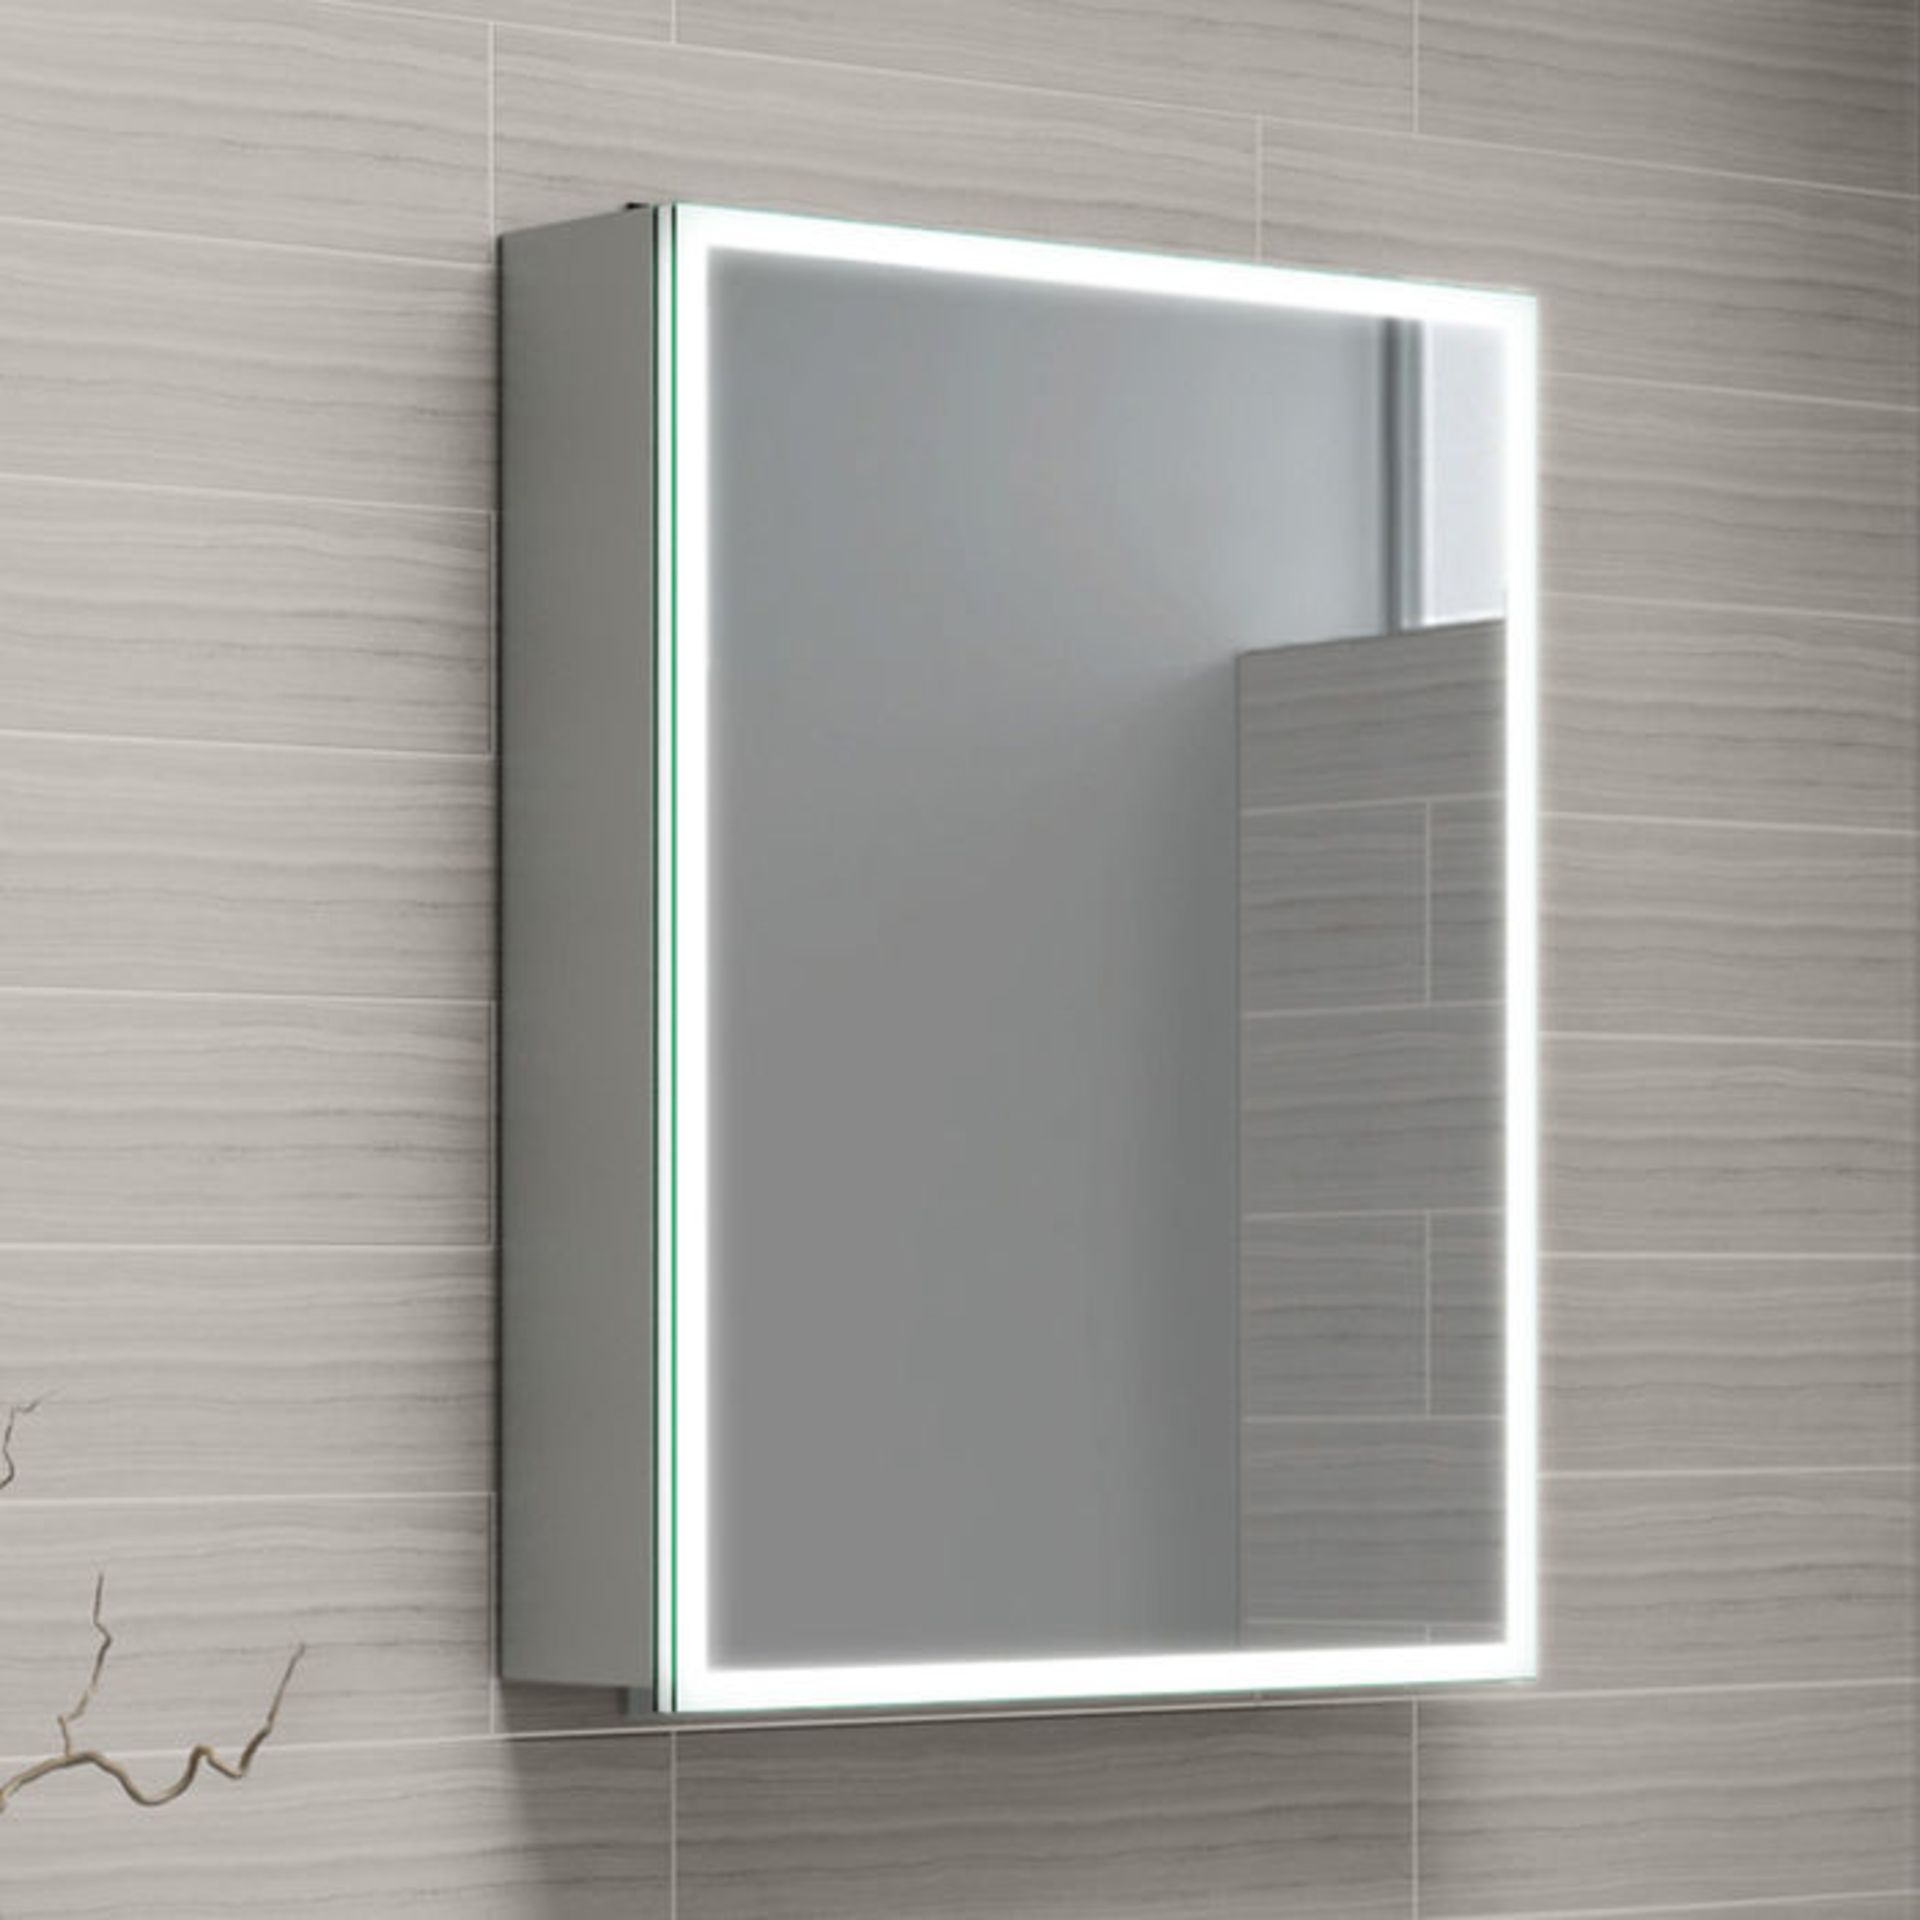 (QP176) 450x600 Cosmic Illuminated LED Mirror Cabinet. RRP £574.99. We love this mirror(QP176) - Image 3 of 4